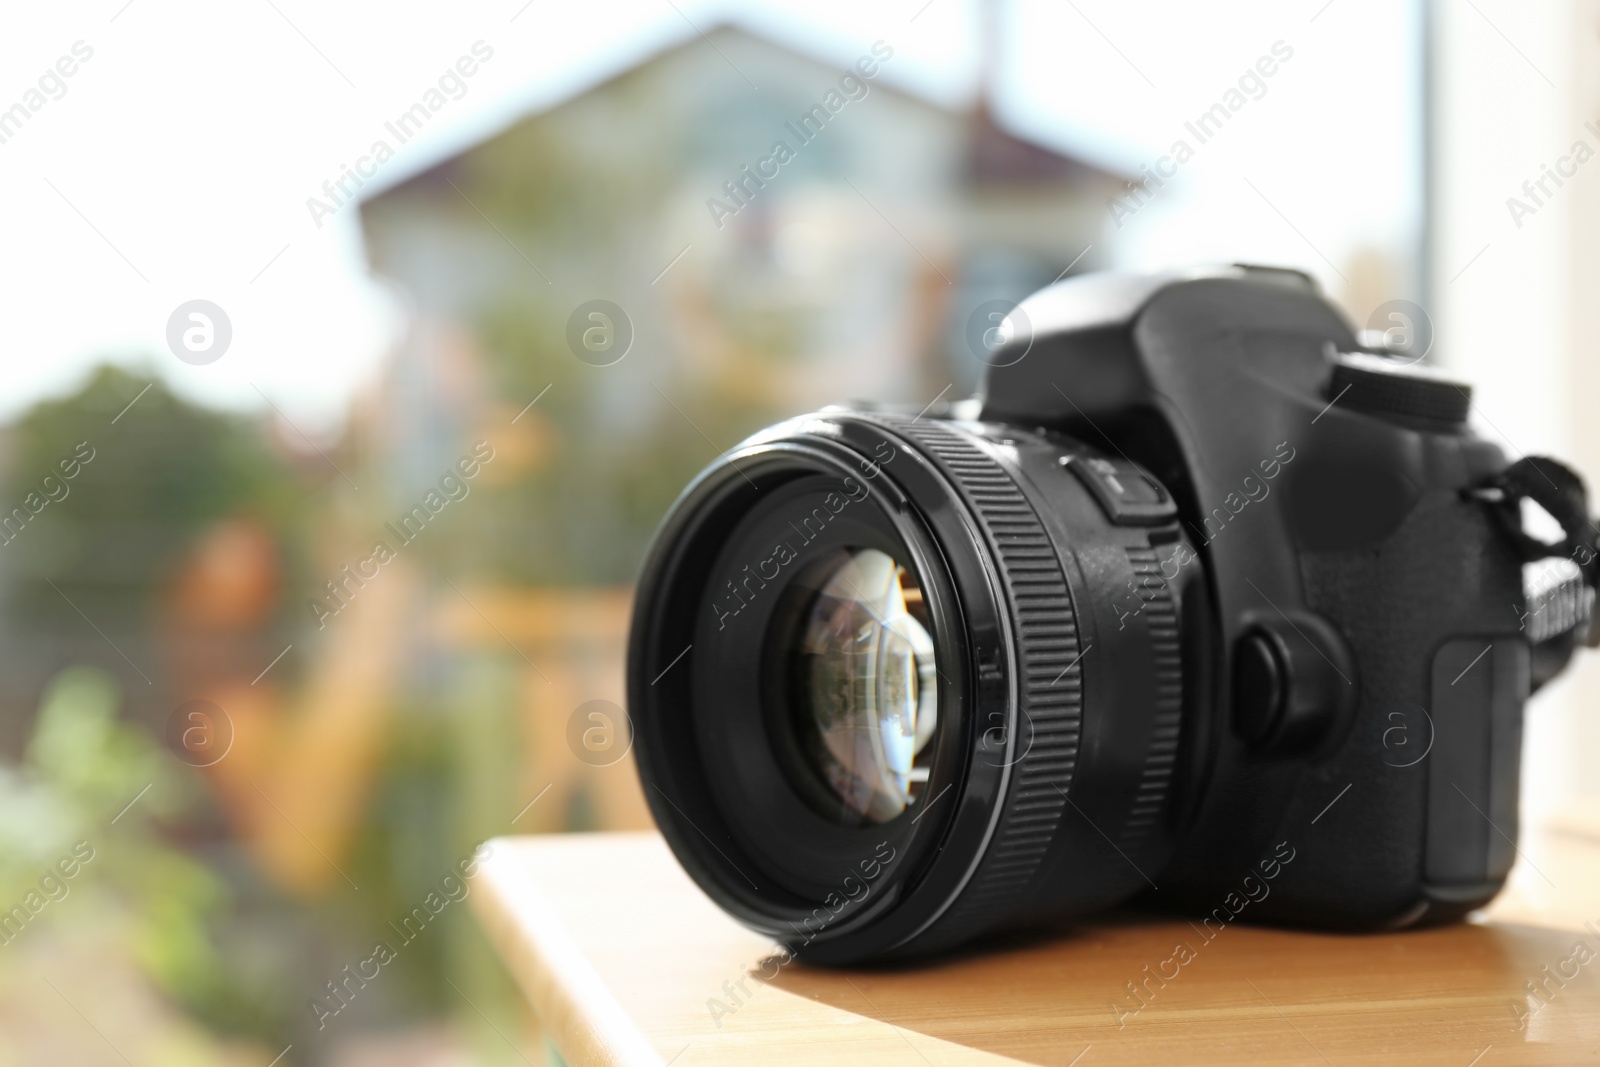 Photo of Professional camera on wooden table against blurred background, space for text. Photographer's equipment